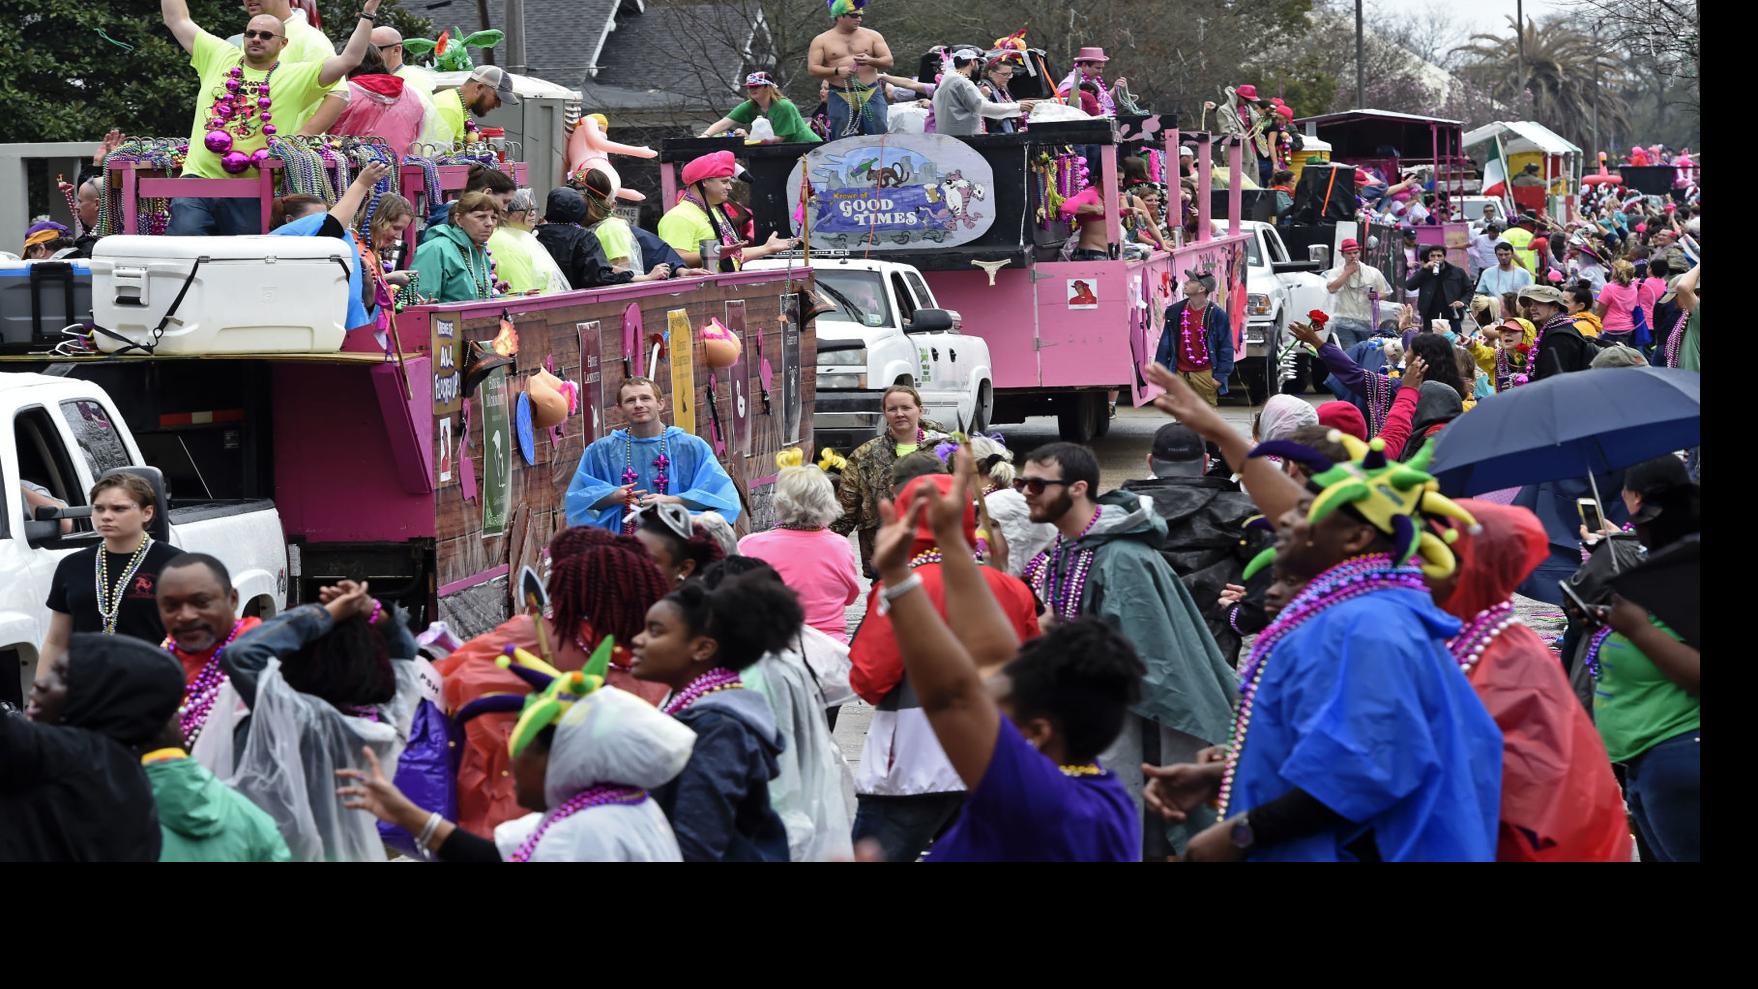 Mardi Gras 2019 in Baton Rouge area: See maps, times for all this year's parades